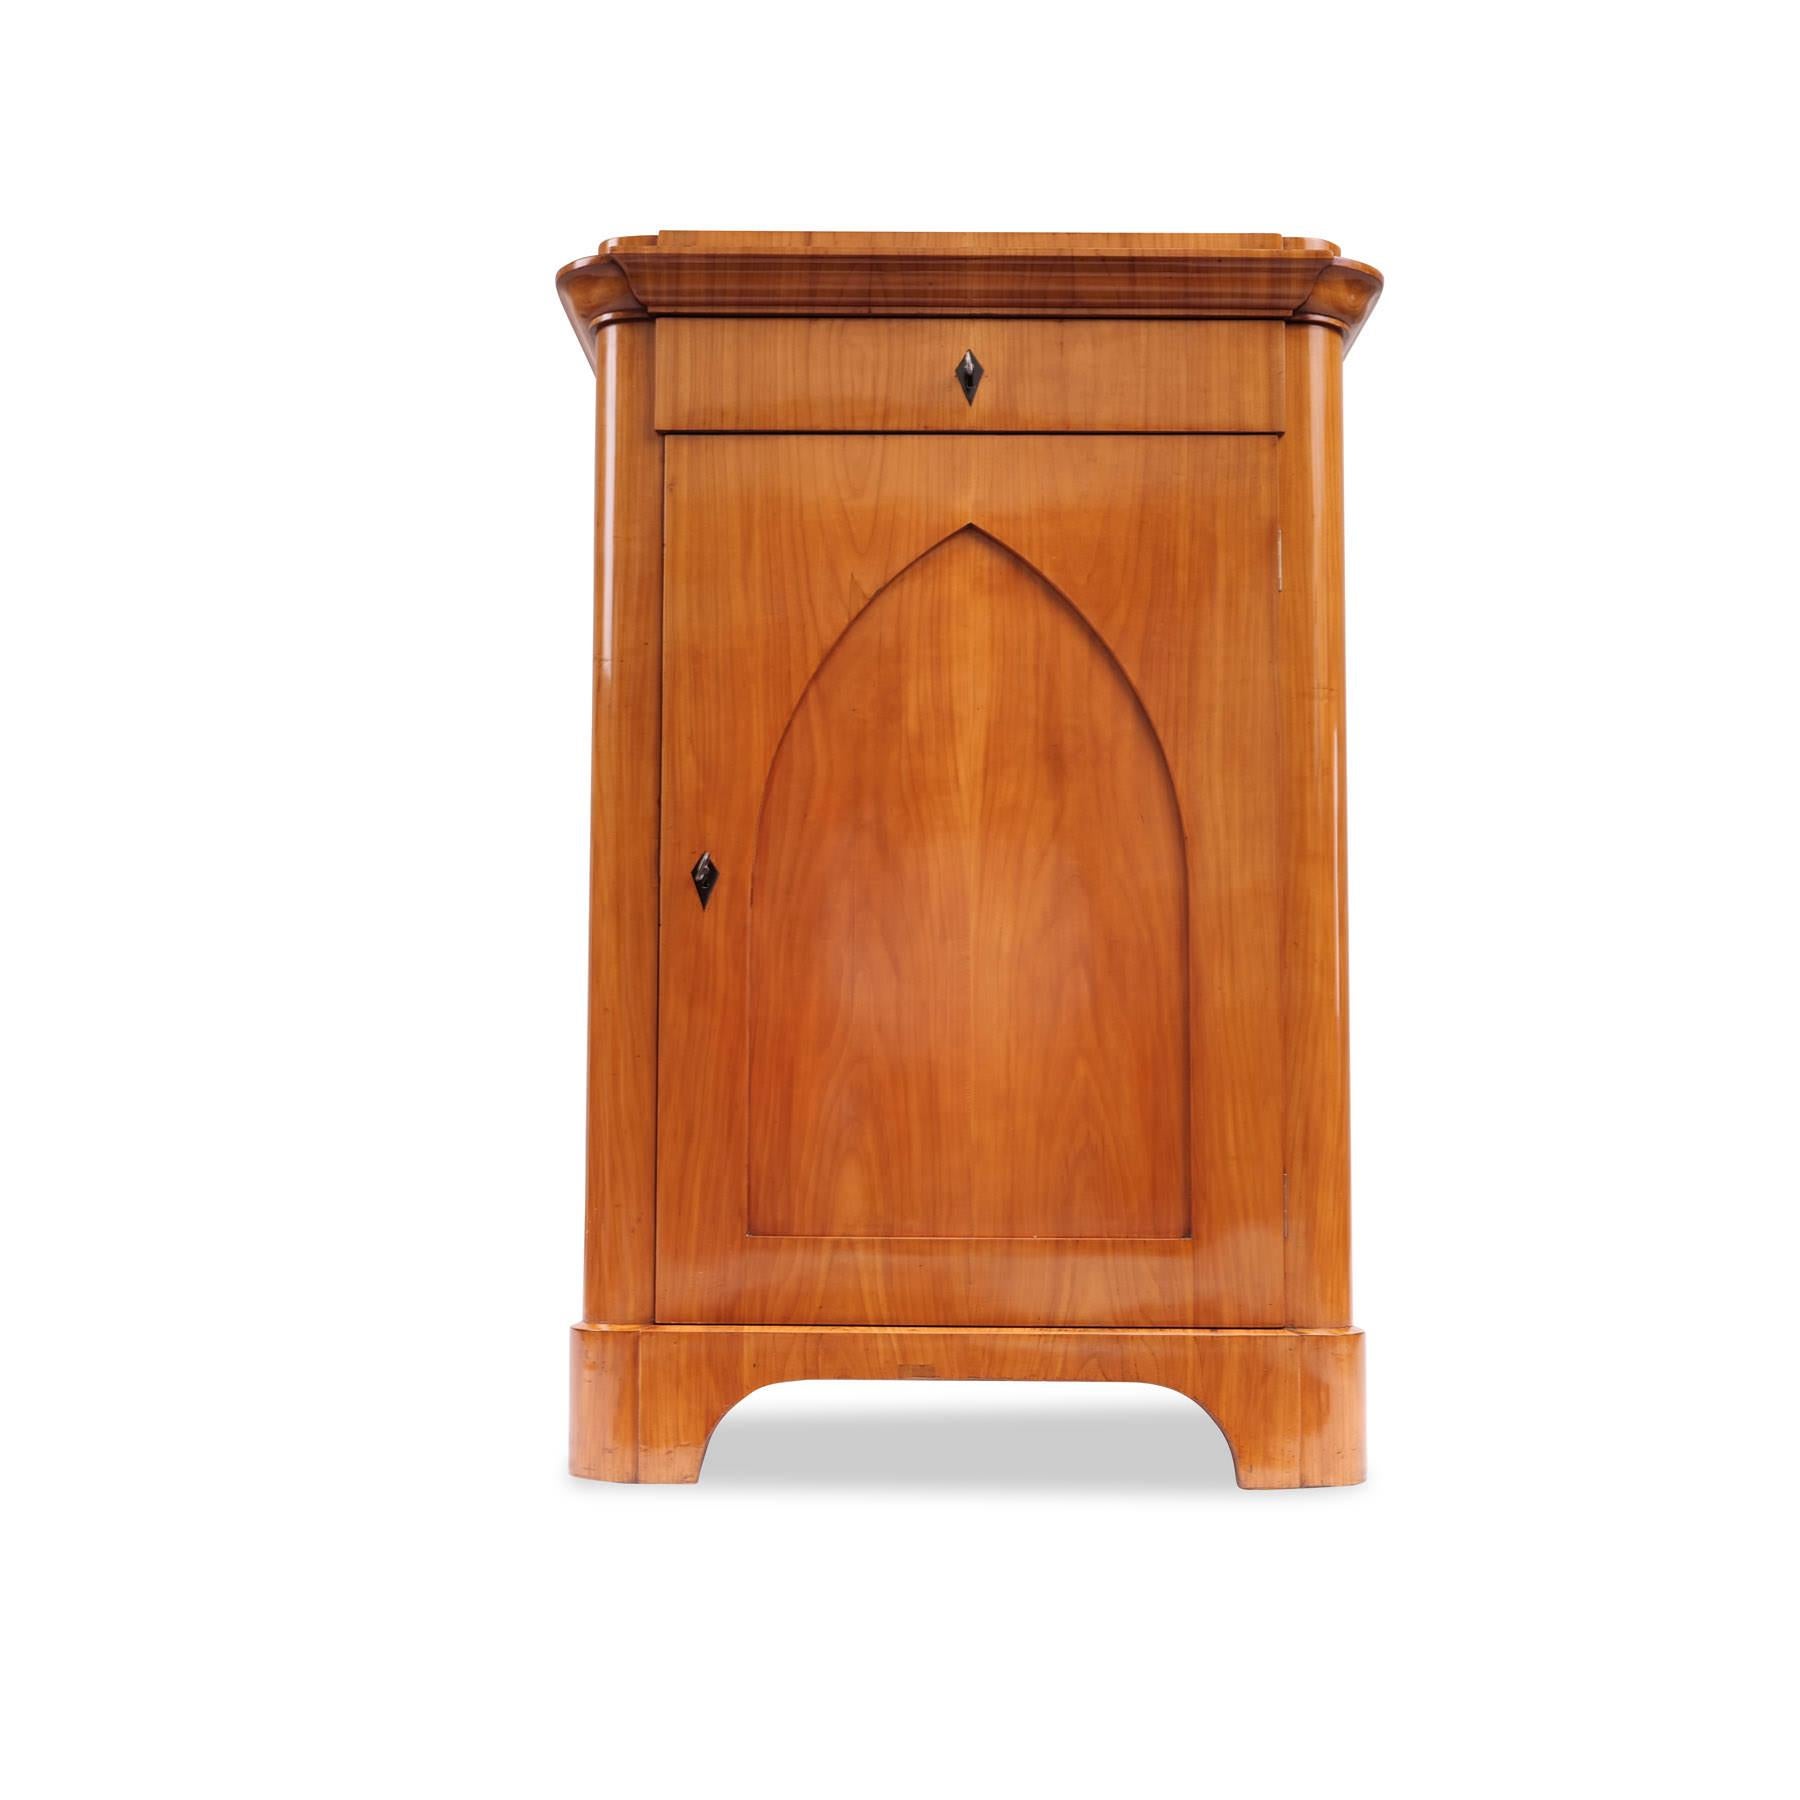 Pillar cabinet / half cabinet, Biedermeier around 1835, cherry veneered, 1 hinged door with neo-Gothic pointed arch panel, 1 drawer, rounded sides, shelves, restored condition, shellac hand polish
Height: 118.5 cm, width: 82 cm, depth 43.5 cm
